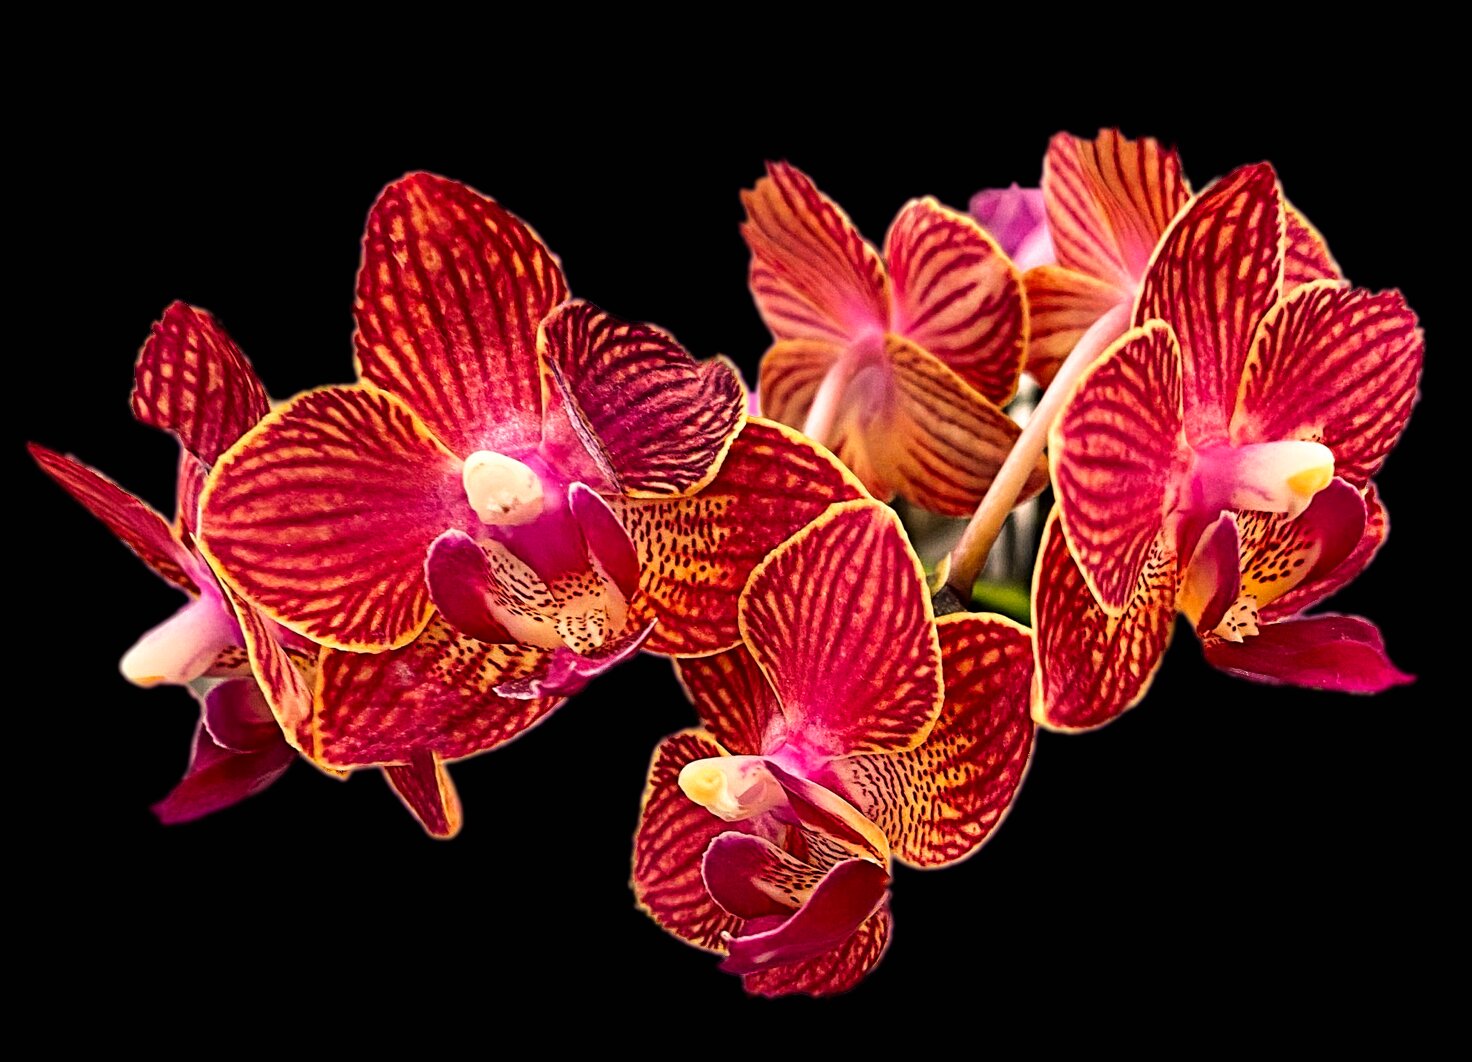 Steven Michael Cohn’s photo “Orchid” will be on display as part of the Malverne Art Walk.